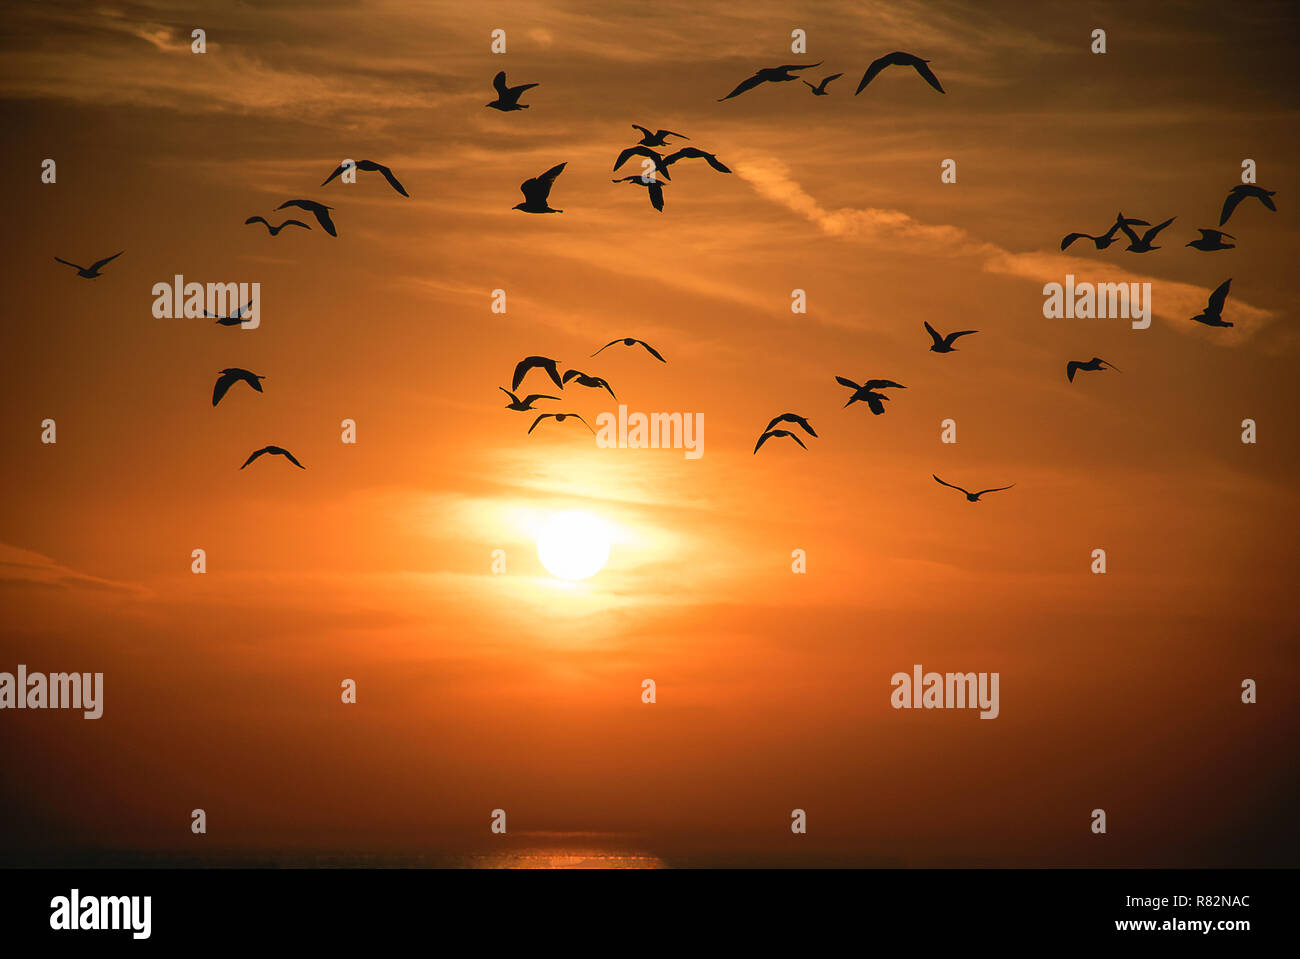 flock of seagulls silhouetted on glowing orange sunset sky over Lake Michigan water Stock Photo